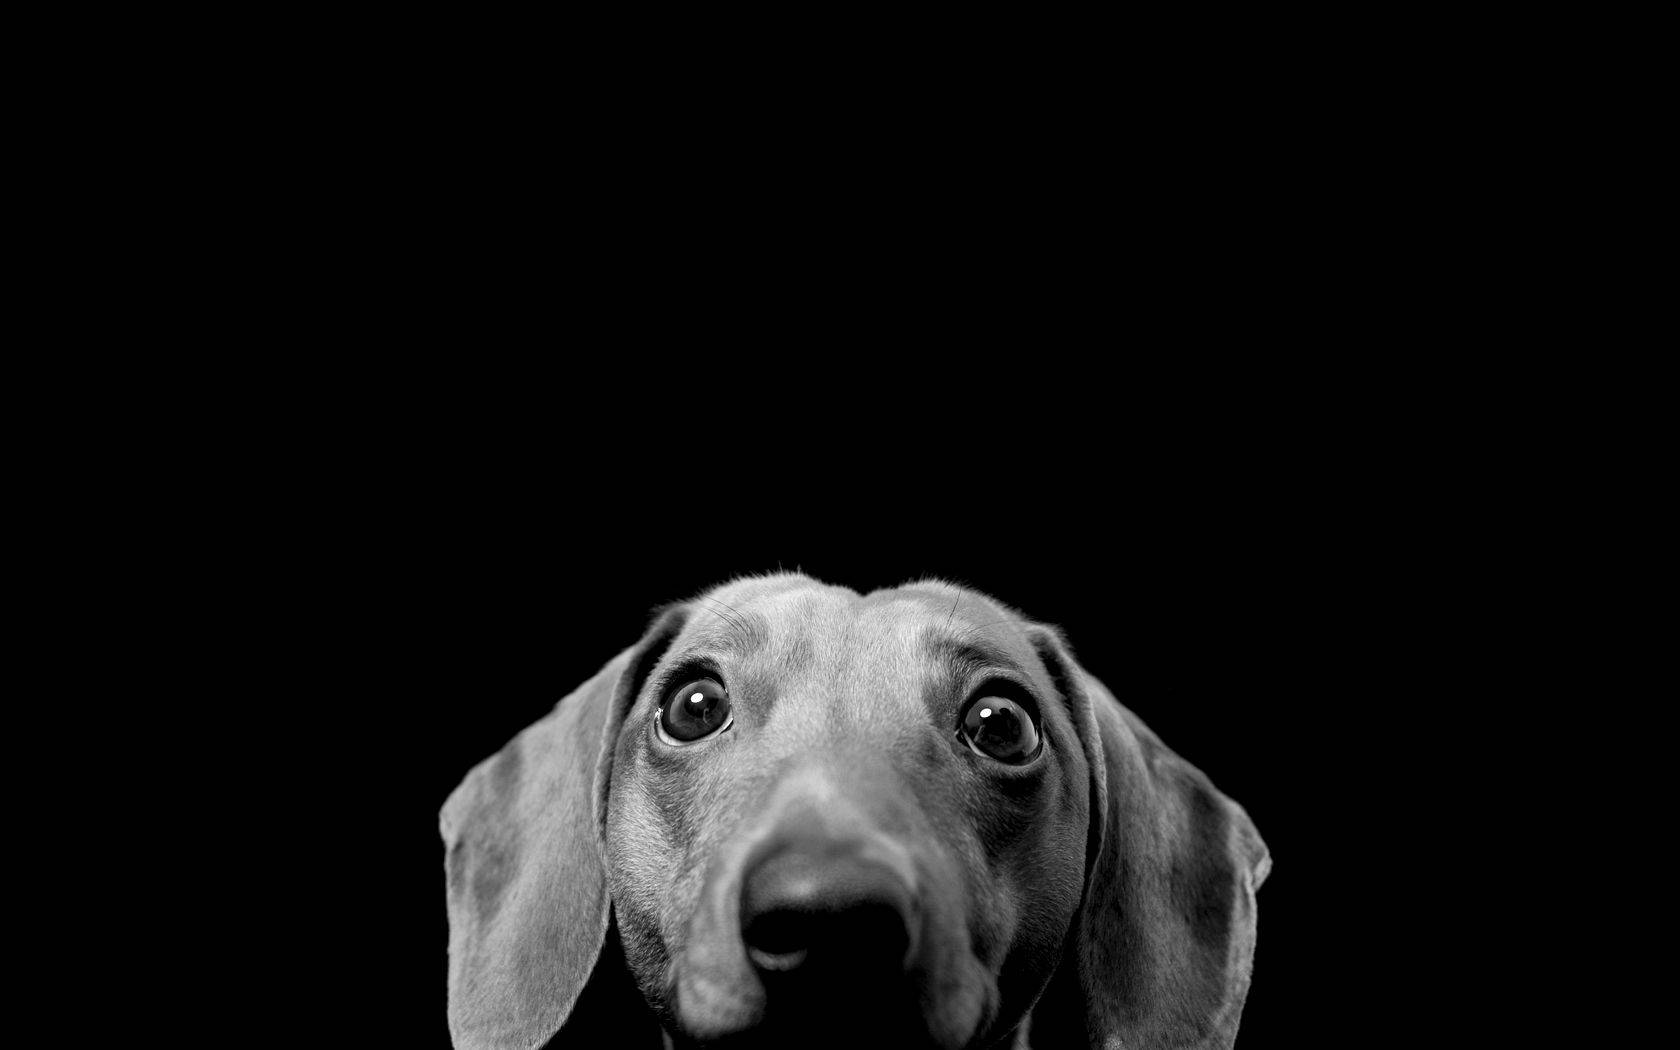 Black and white wallpaper of wide-eyed dachshund dog